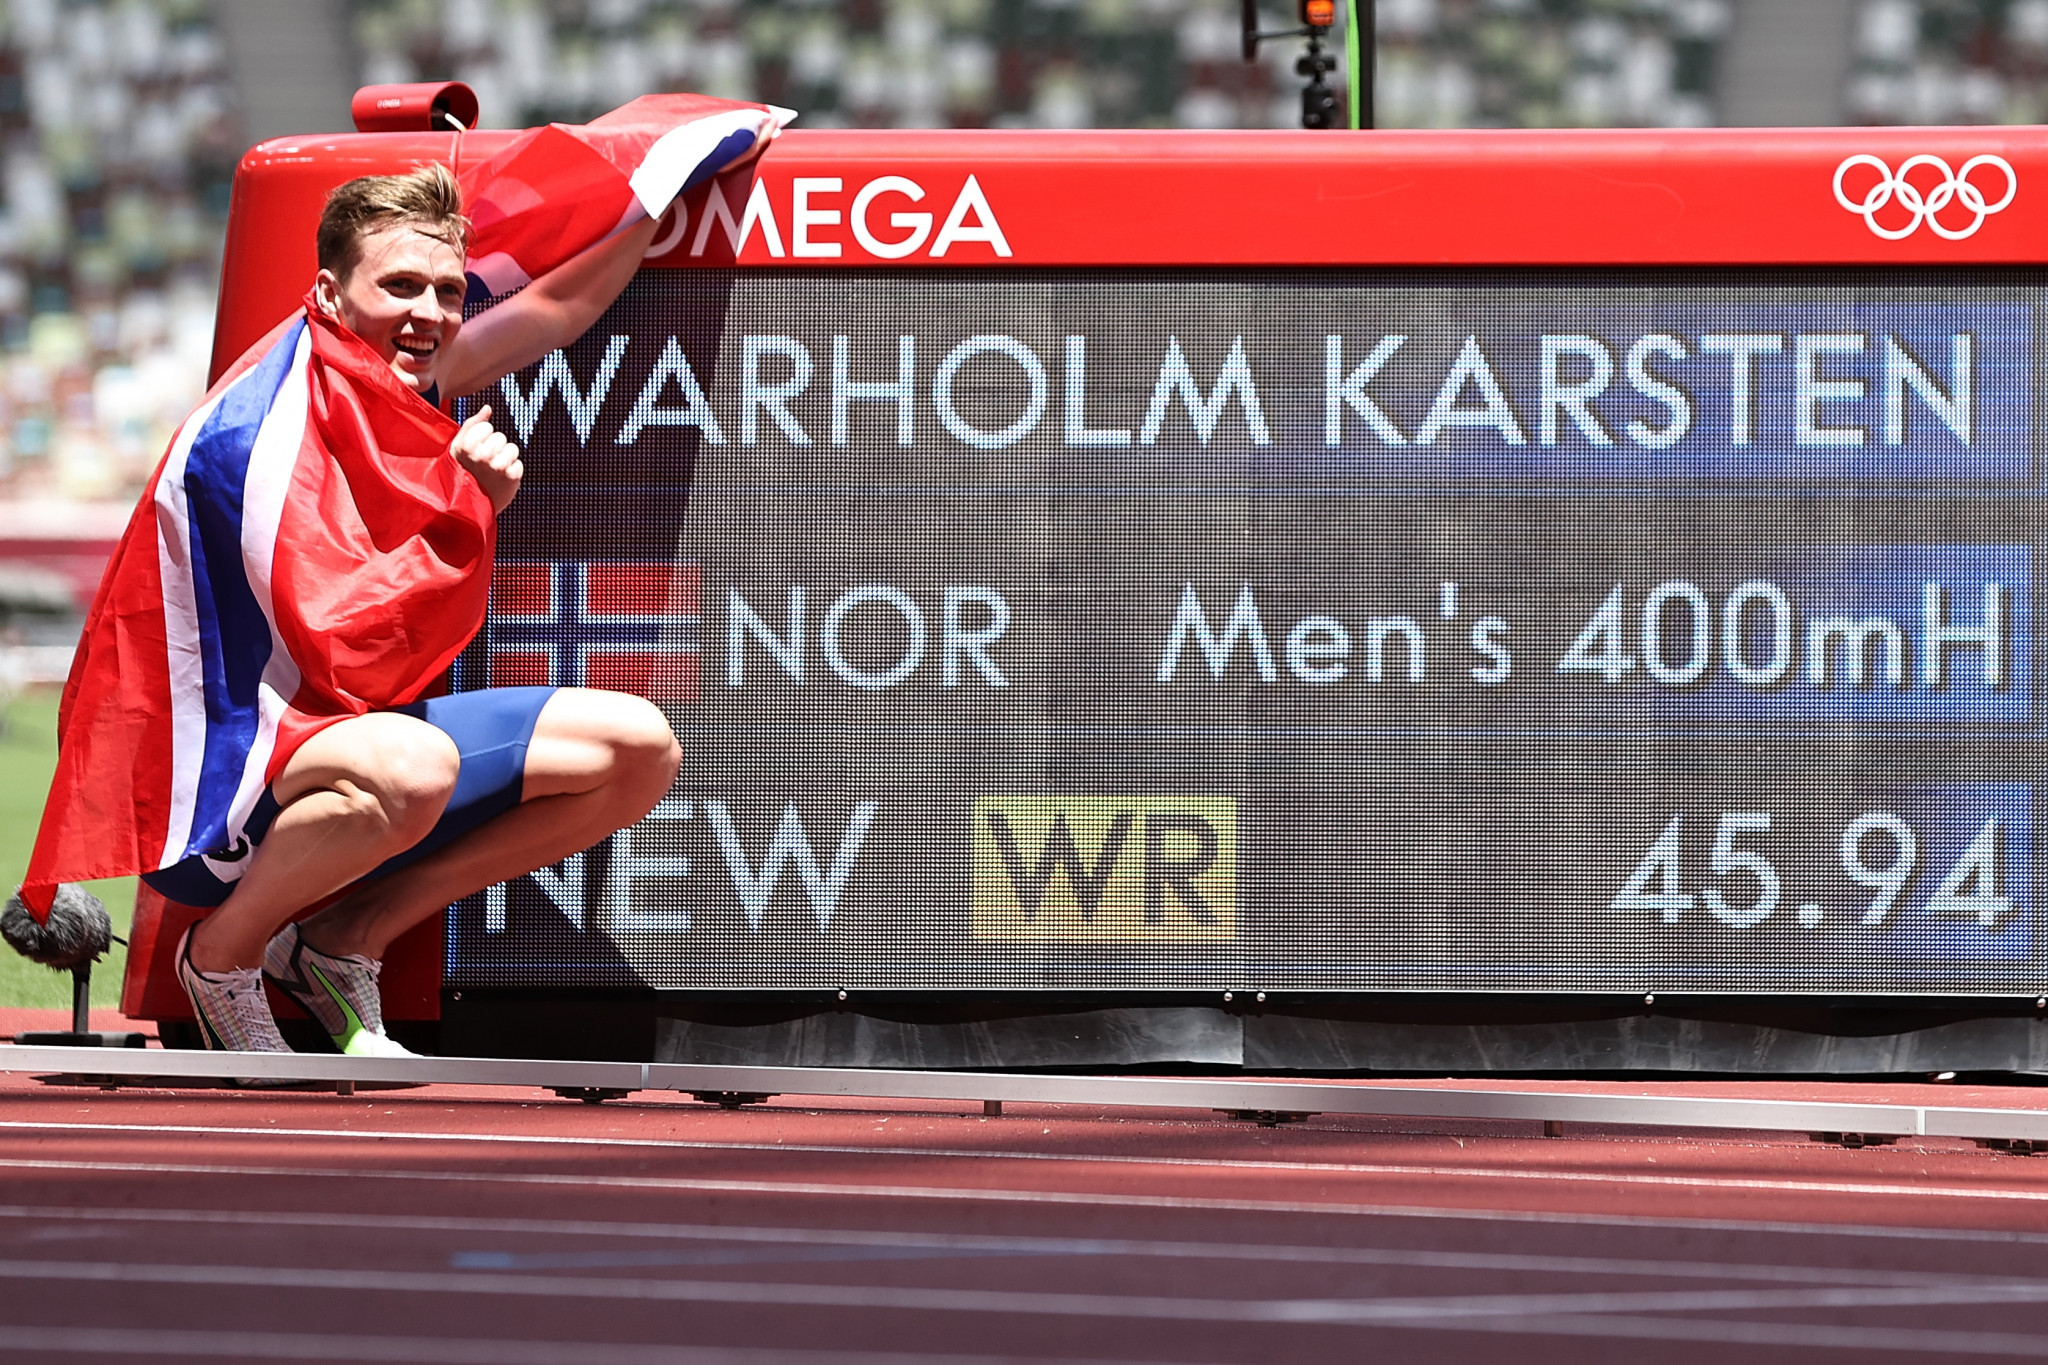 Karsten Warholm set a new world record in the men's 400m at Tokyo 2020 as six of the first seven finishers also set national or continental records ©Getty Images